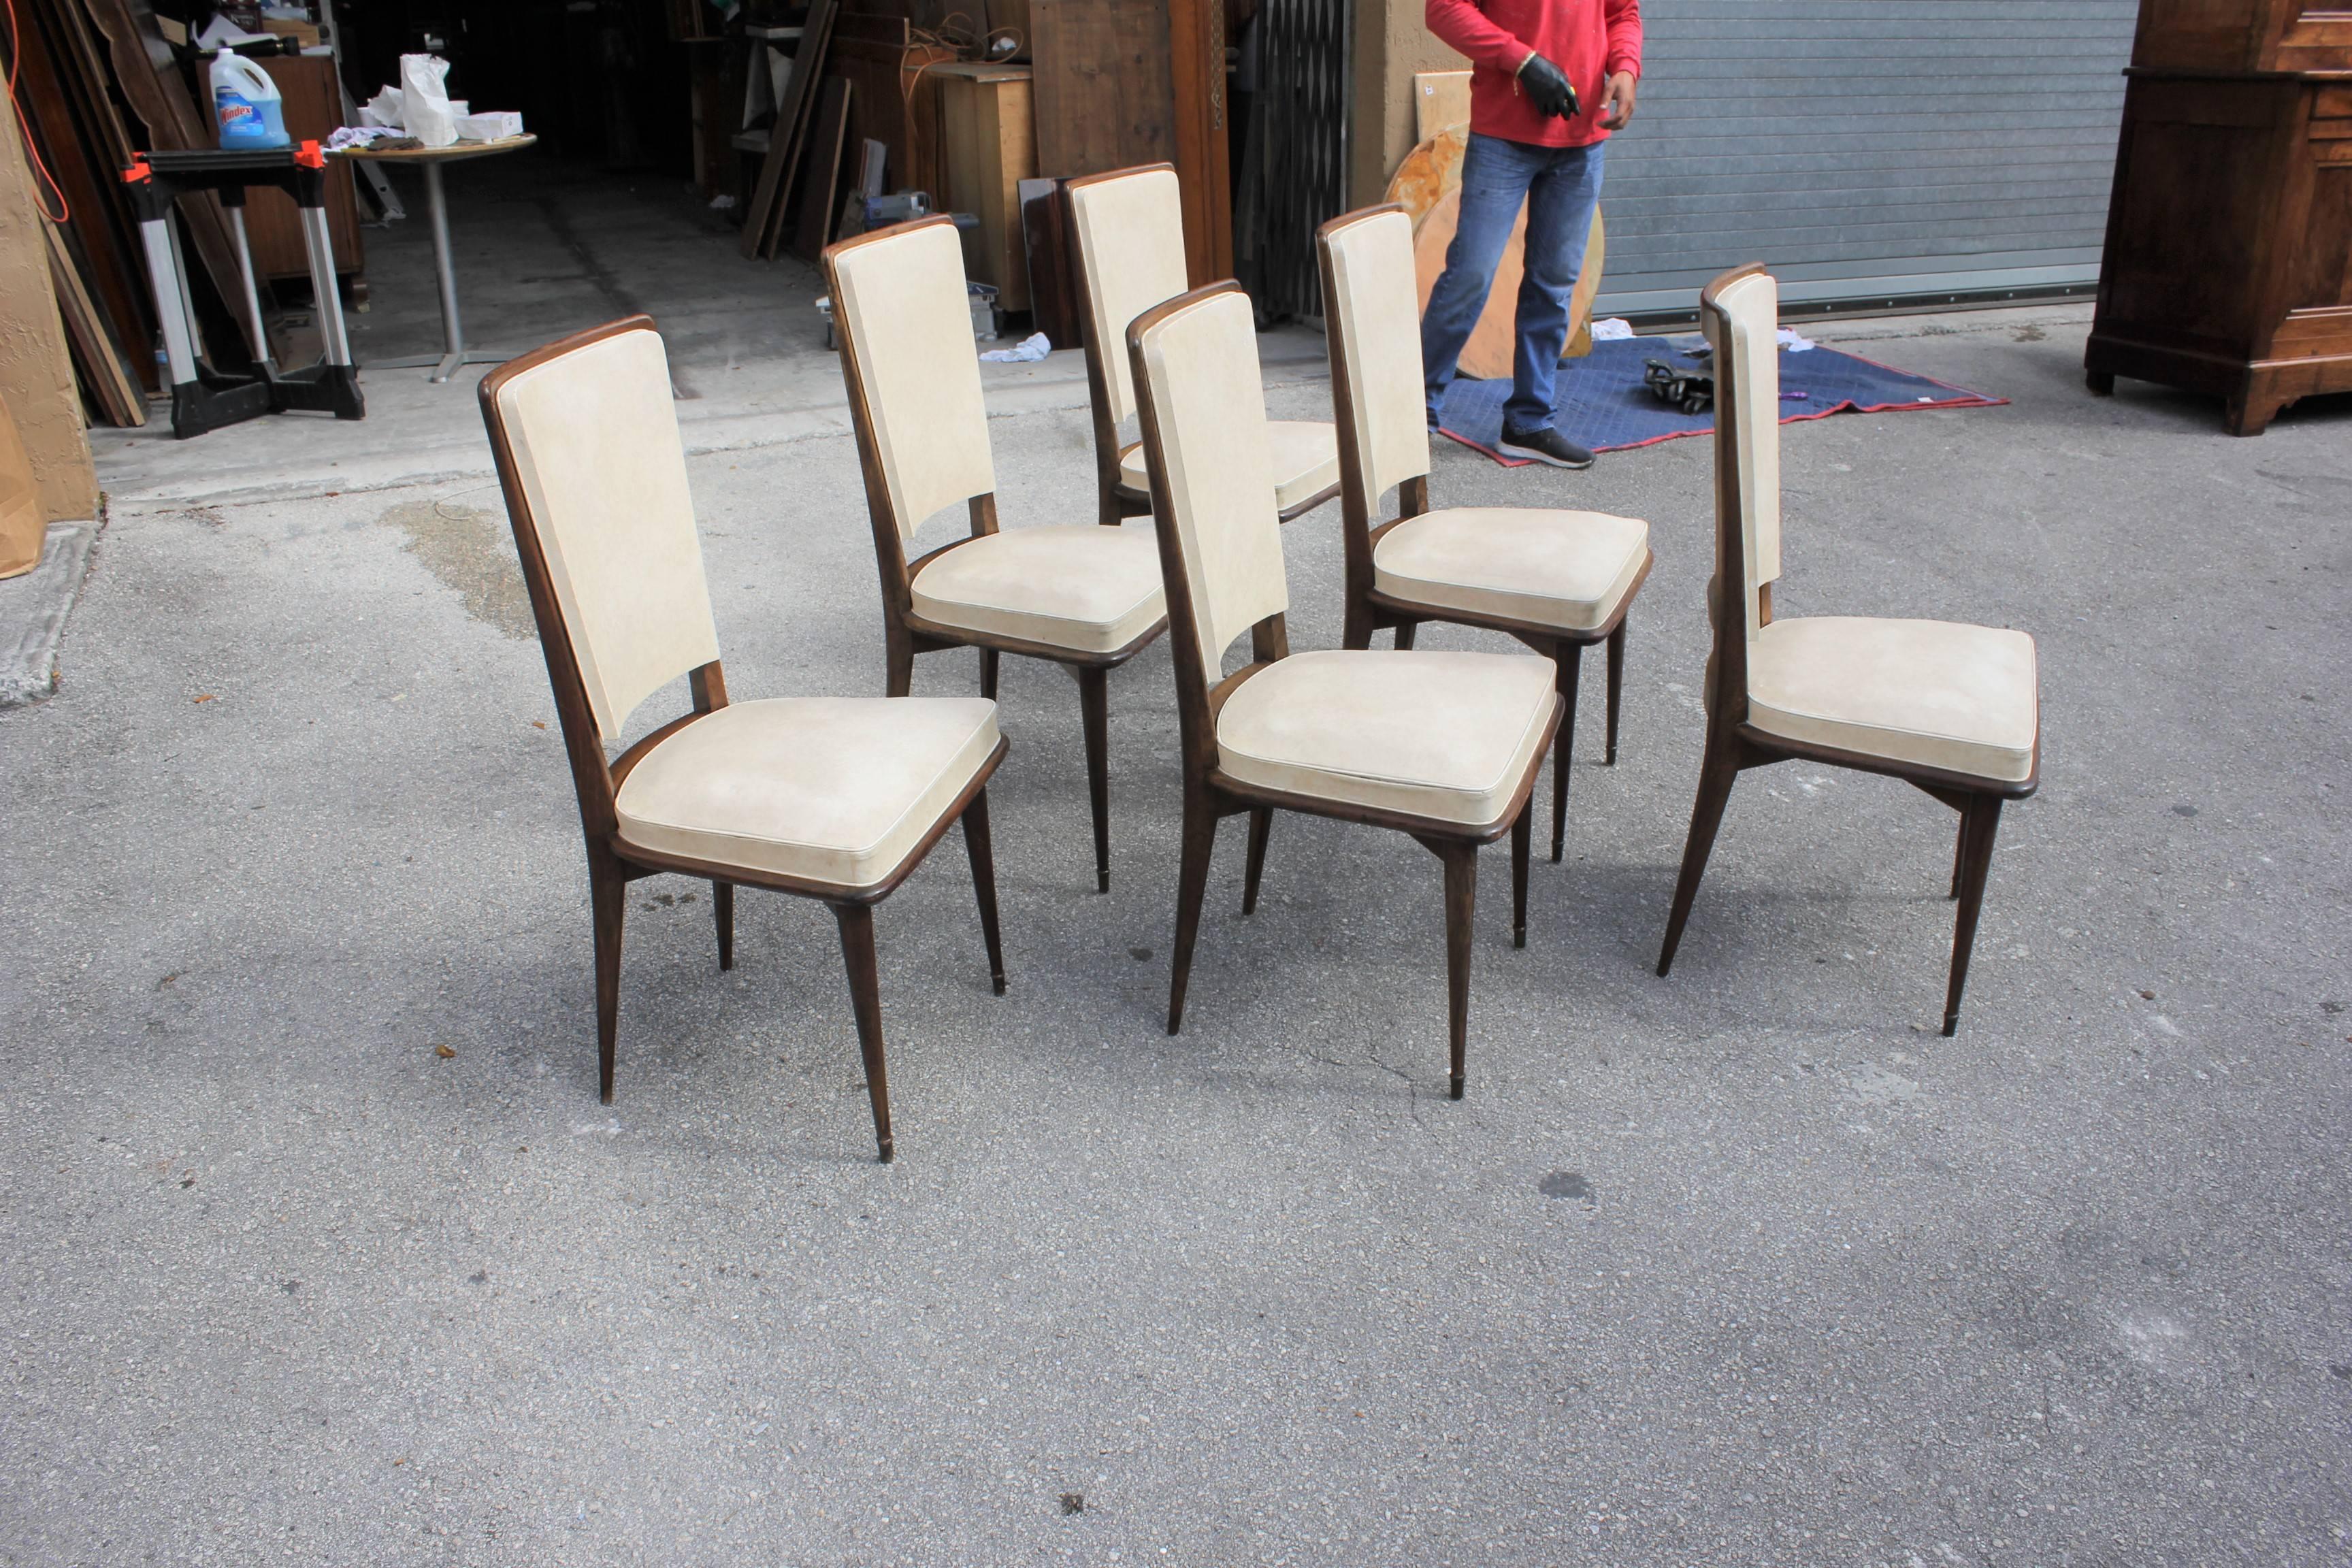 Description set of six French Art Deco dining chairs solid mahogany, circa 1940s, the chair frames are in excellent condition. Reupholstery is vinyl recommended for all six dining chairs, but the color of the dining chairs are beautiful, circa